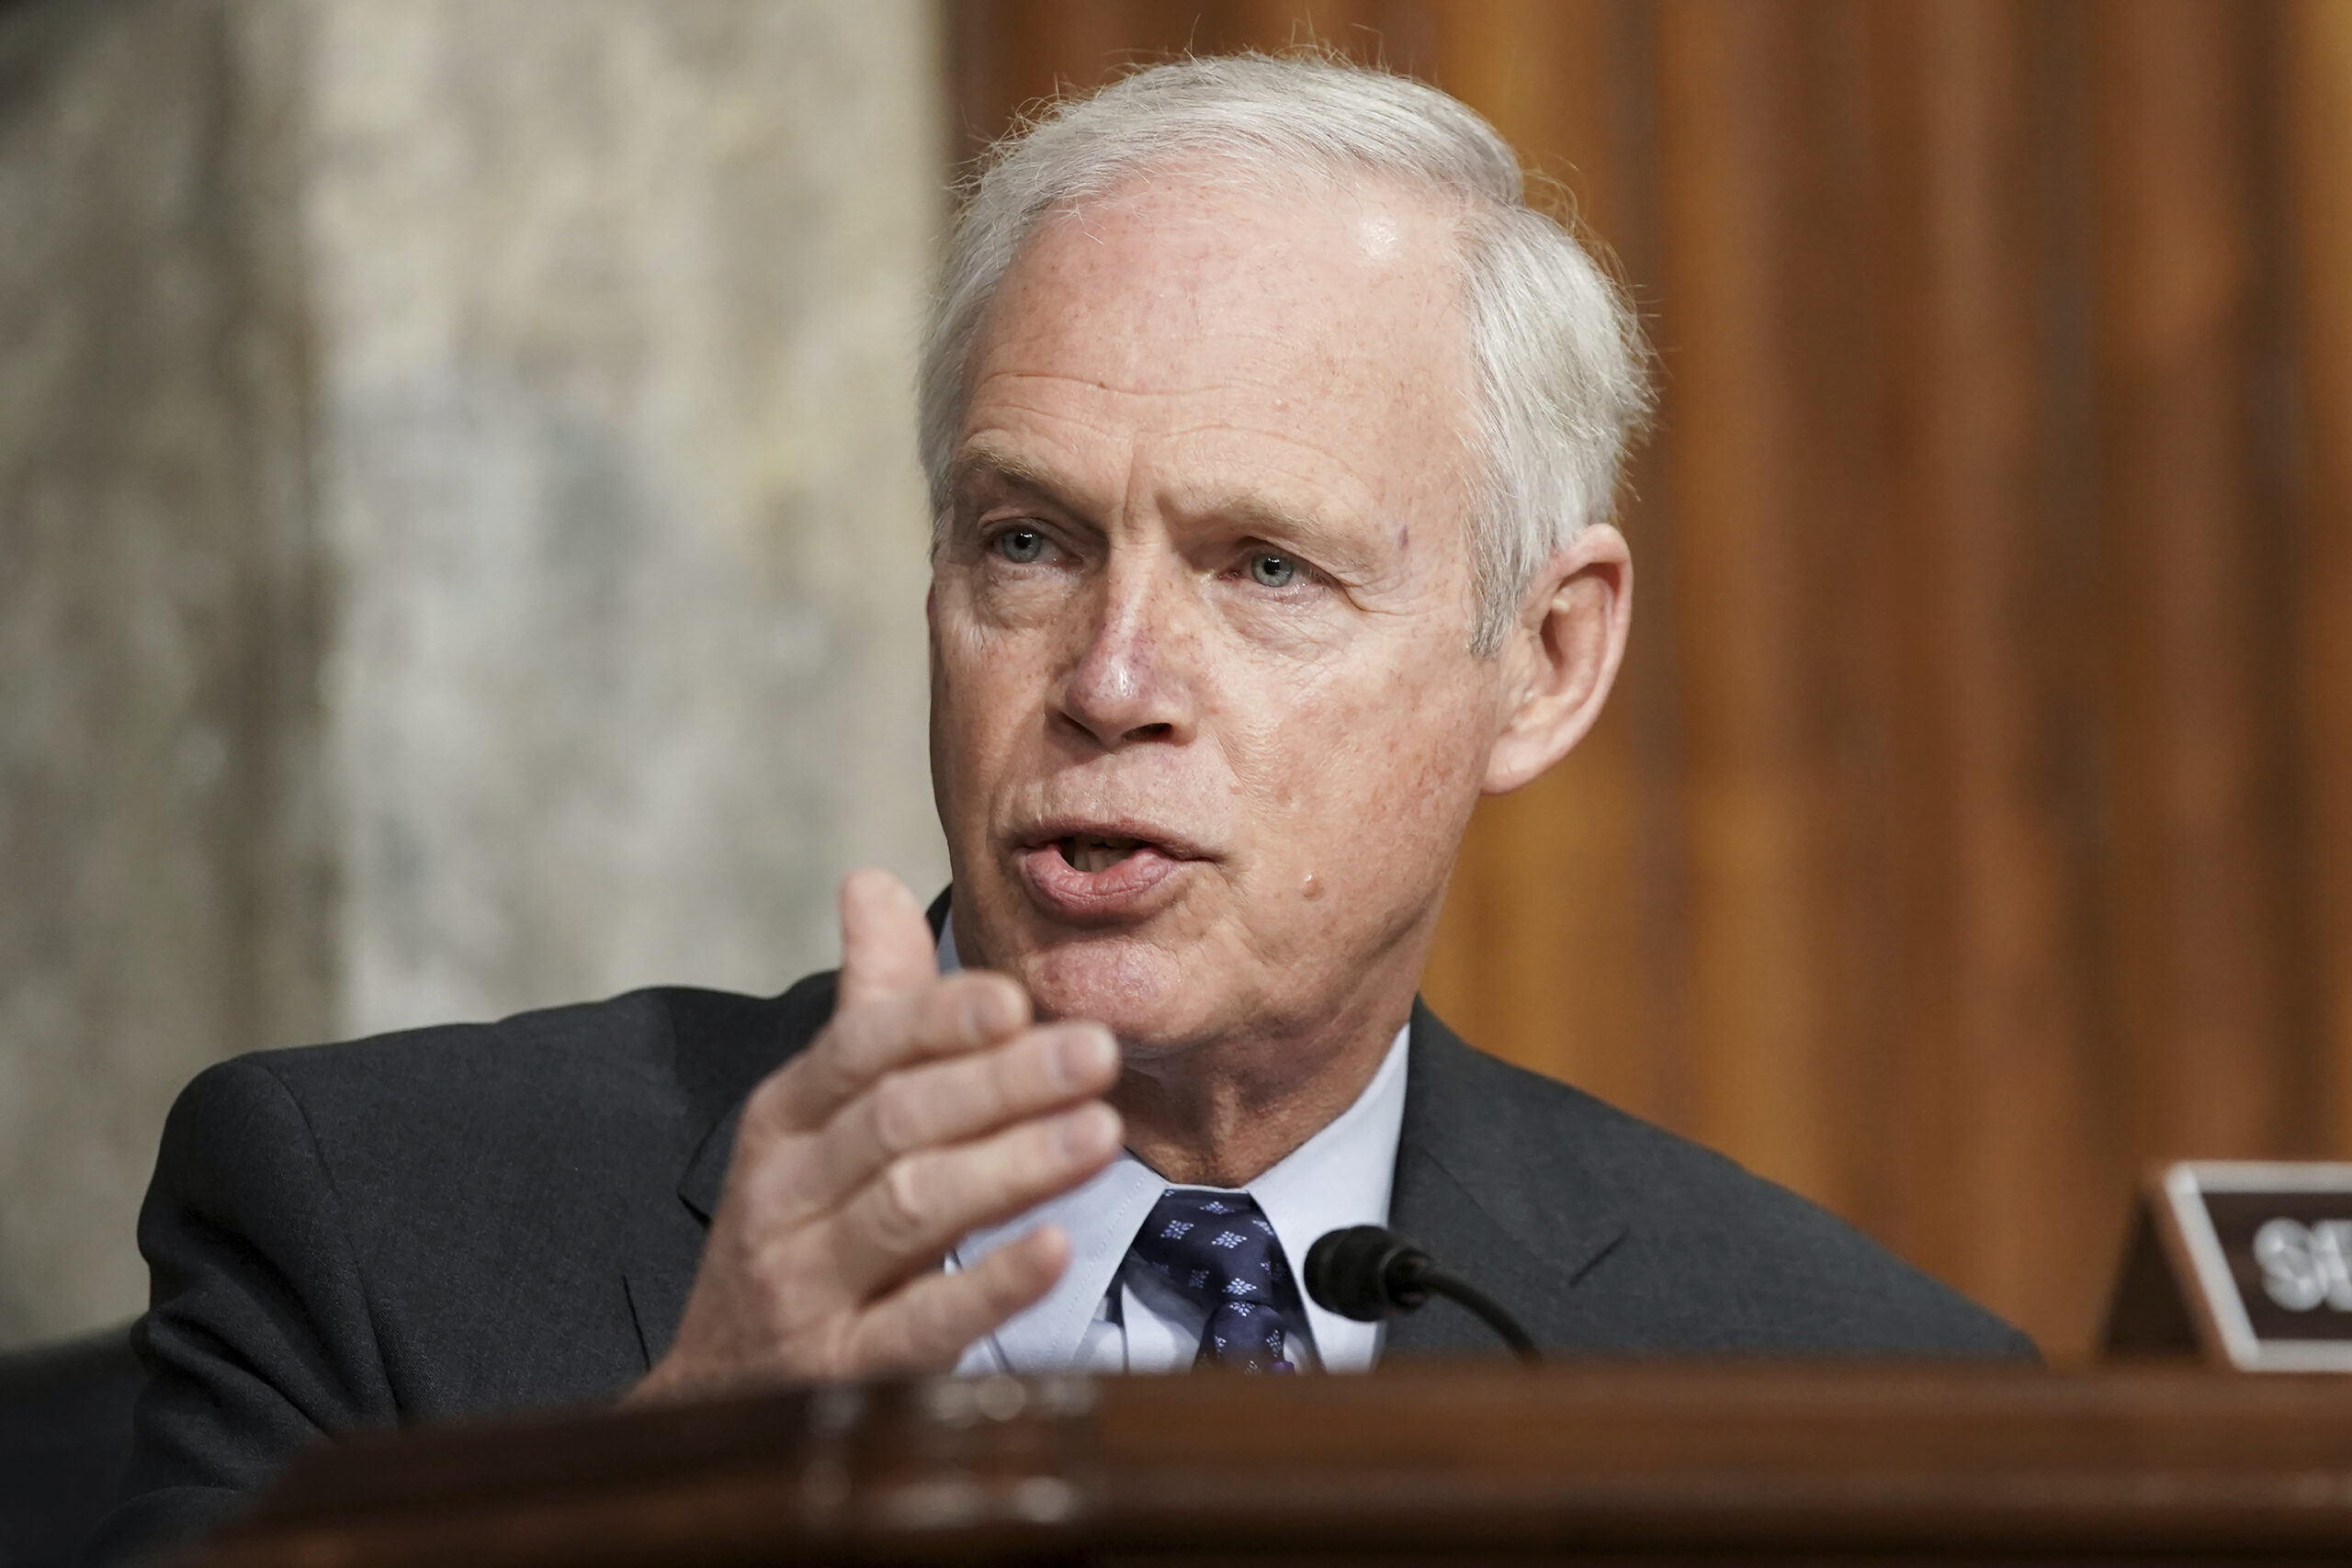 FILE - In this March 3, 2021 file photo, Sen. Ron Johnson, R-Wis., speaks during a Senate Committee on Homeland Security and Governmental Affairs and Senate Committee on Rules and Administration joint hearing examining the January 6, attack on the U.S. Capitol in Washington. Critics of Johnson are calling him racist after he told an interviewer on Thursday, March 11, that he wasn’t worried about the supporters of former President Donald Trump who stormed the U.S. Capitol in January, but might have been concerned if they had been Black Lives Matter protesters. (Greg Nash/Pool via AP)